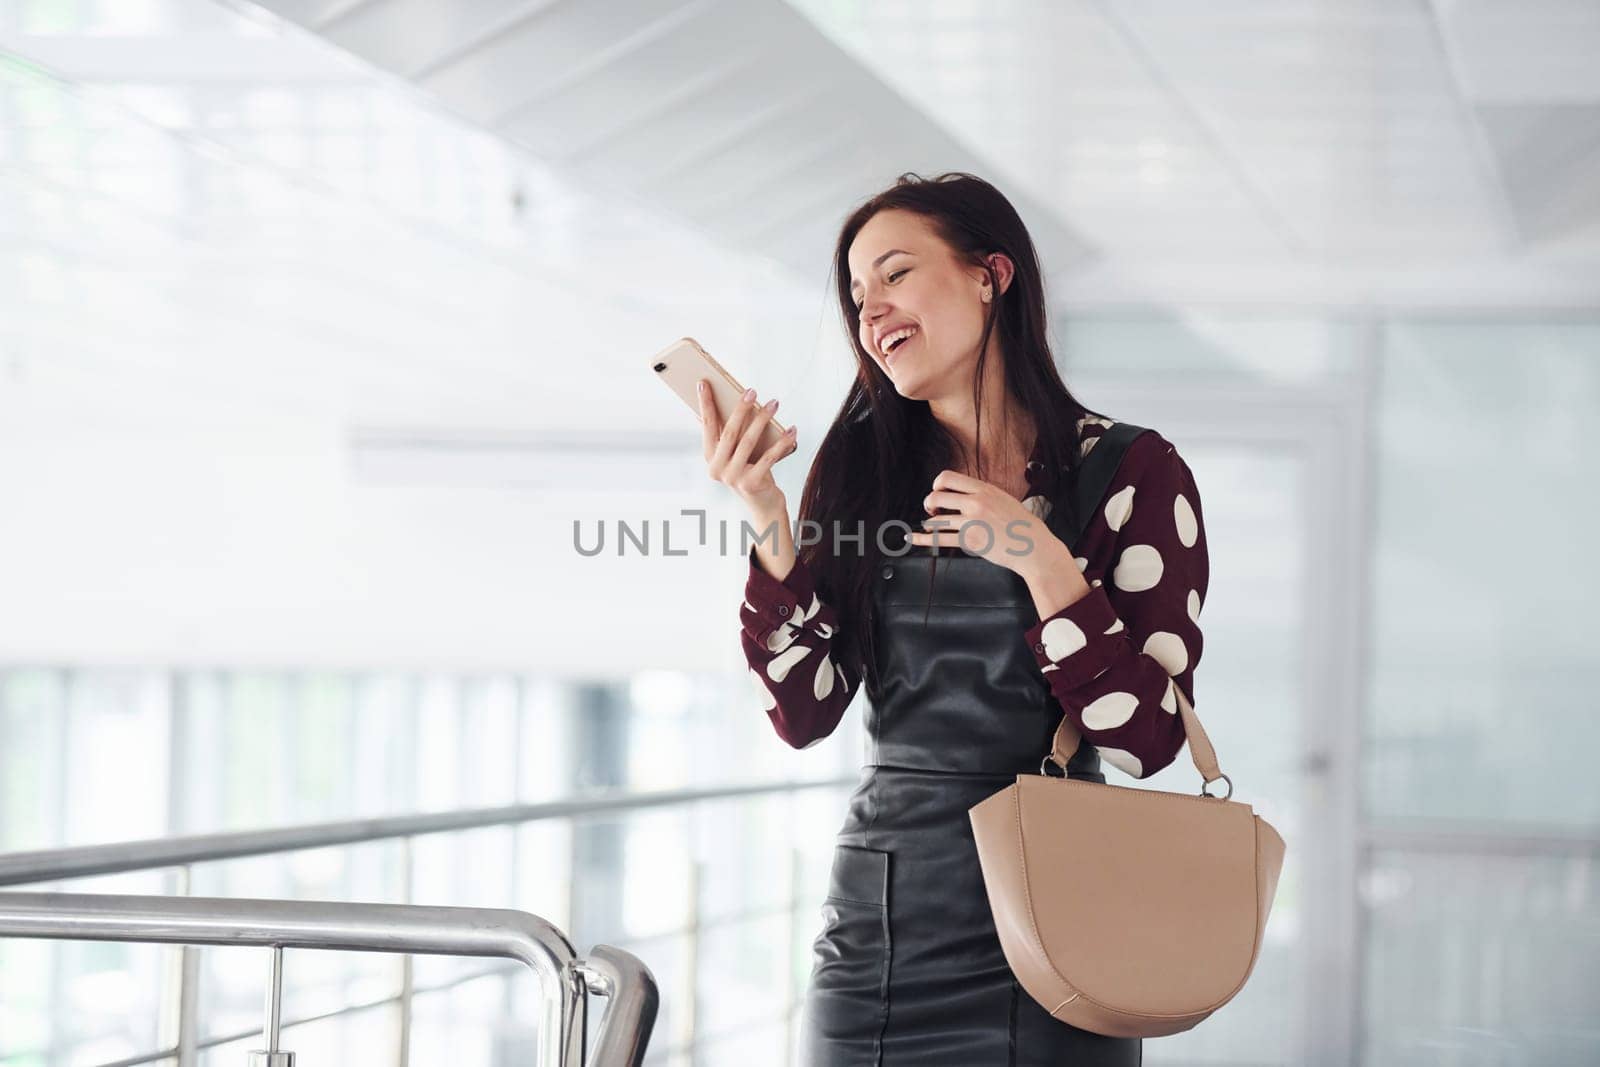 Holding phone. Beautiful young brunette in black skirt indoors in office or airport. Having free time.